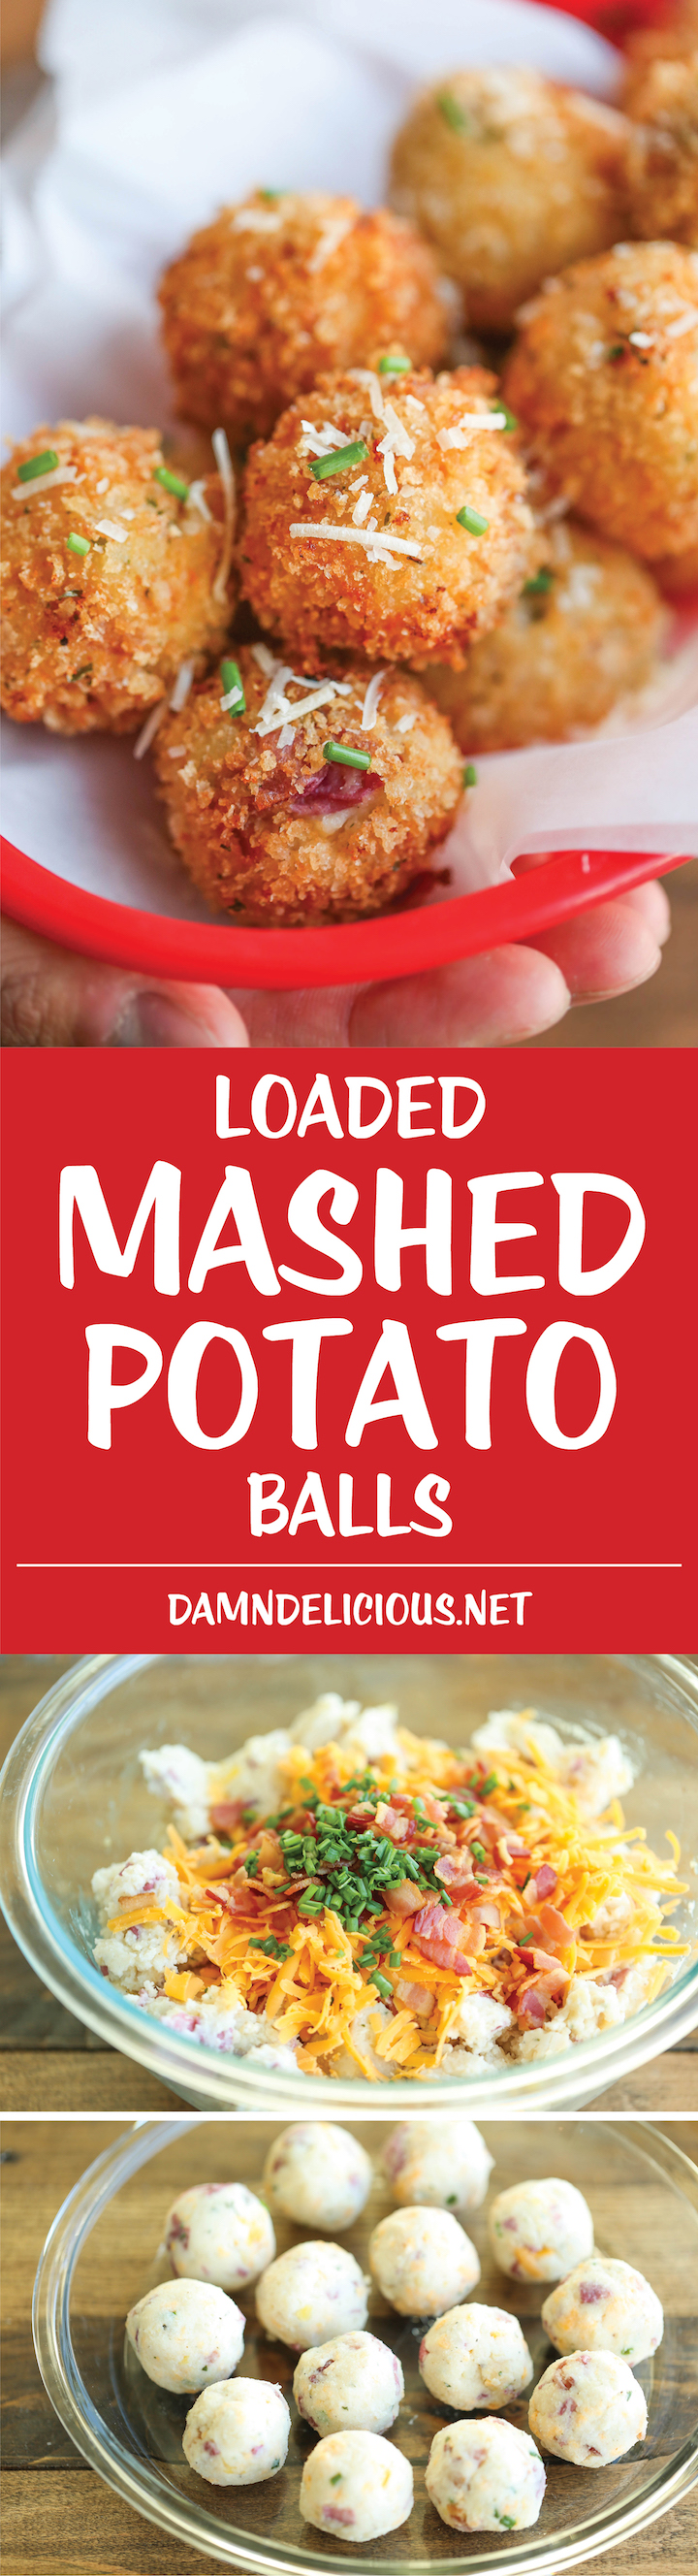 Loaded Mashed Potato Balls - What do you do with leftover mashed potatoes? You make melt-in-your-mouth, crisp yet creamy mashed potato balls of course!